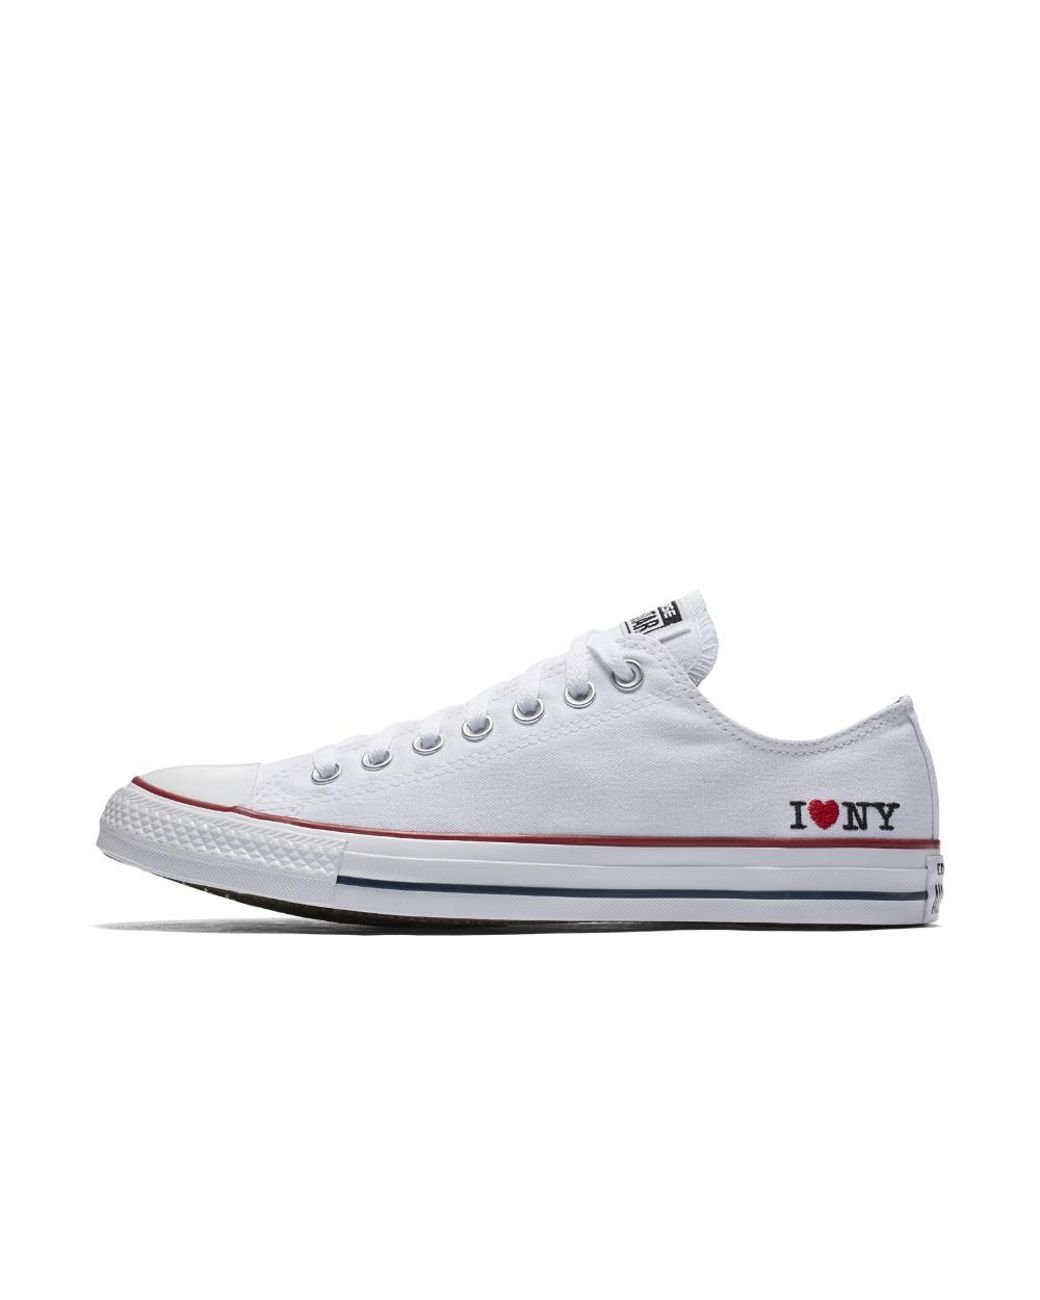 Chuck All Star I Love Ny Top Shoes White Size 9.5 11.5 | Lyst